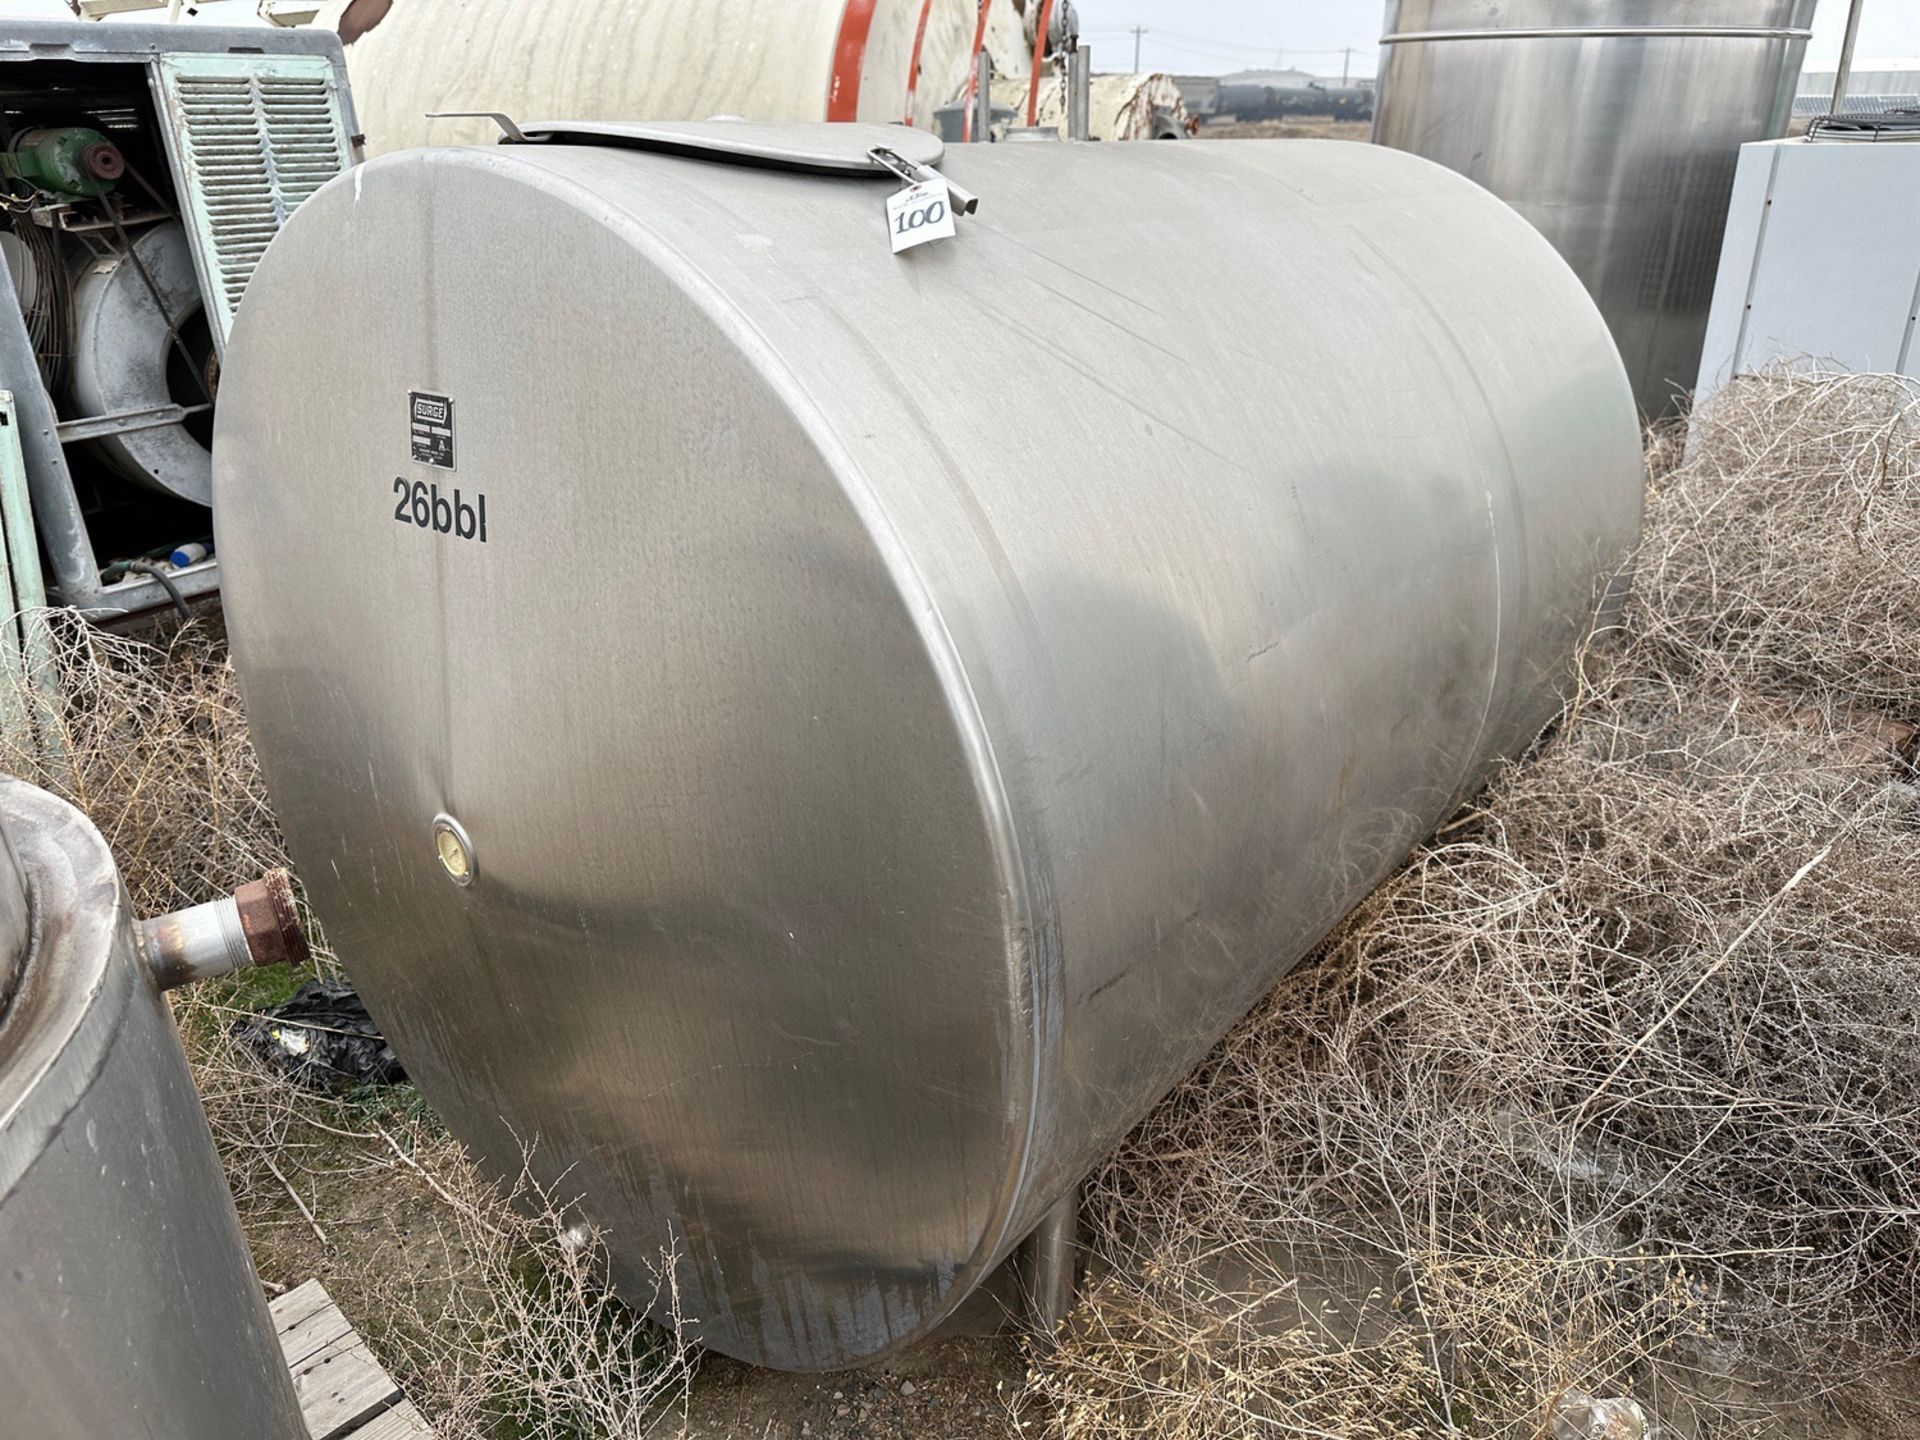 Surge 26 BBL Stainless Steel Horizontal Tank with Top Mandoor | Rig Fee $500